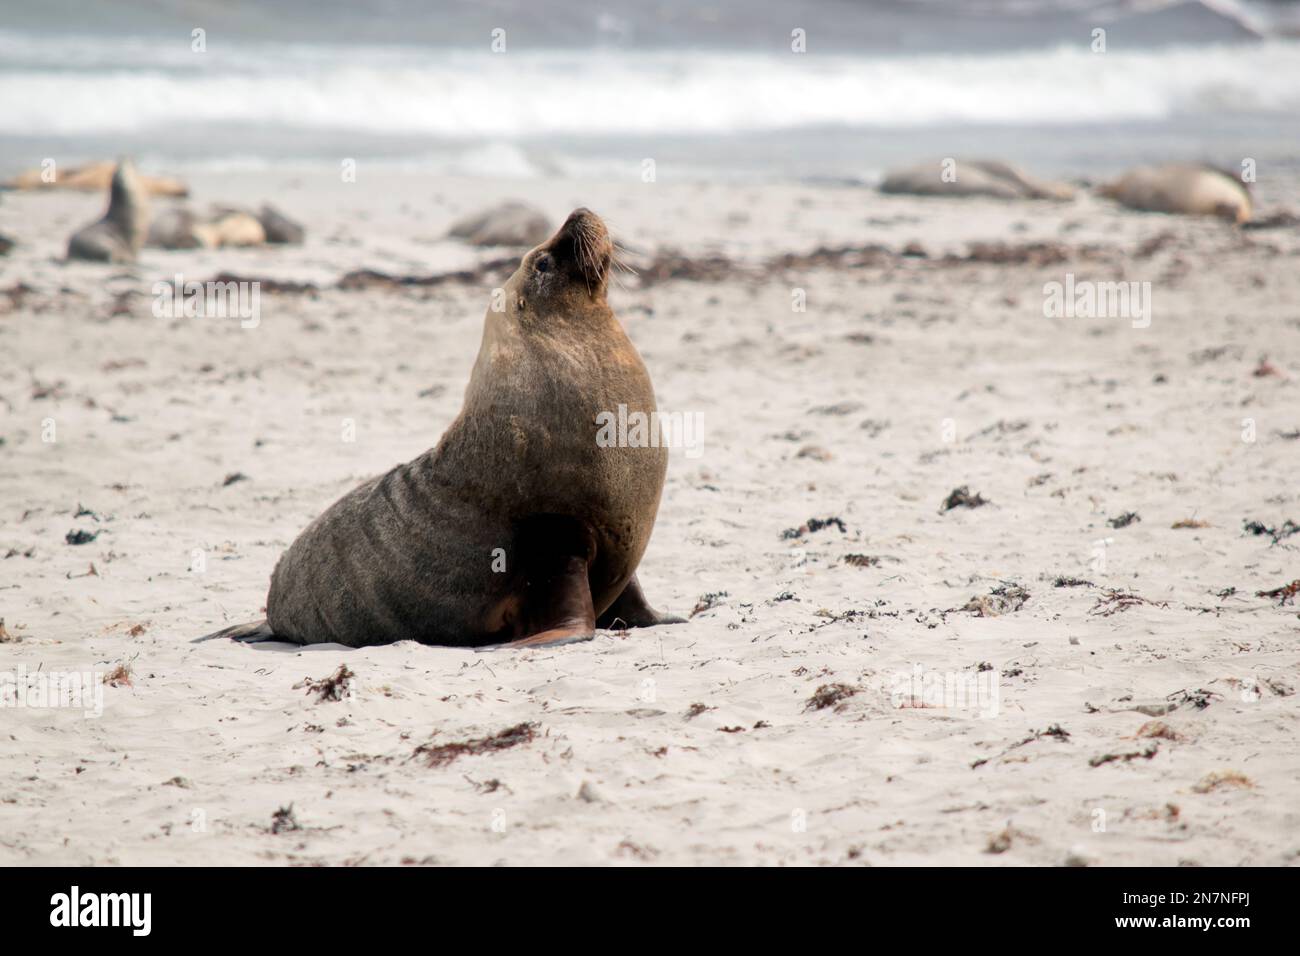 the male sea lion is walking on the beach looking for a place to rest Stock Photo